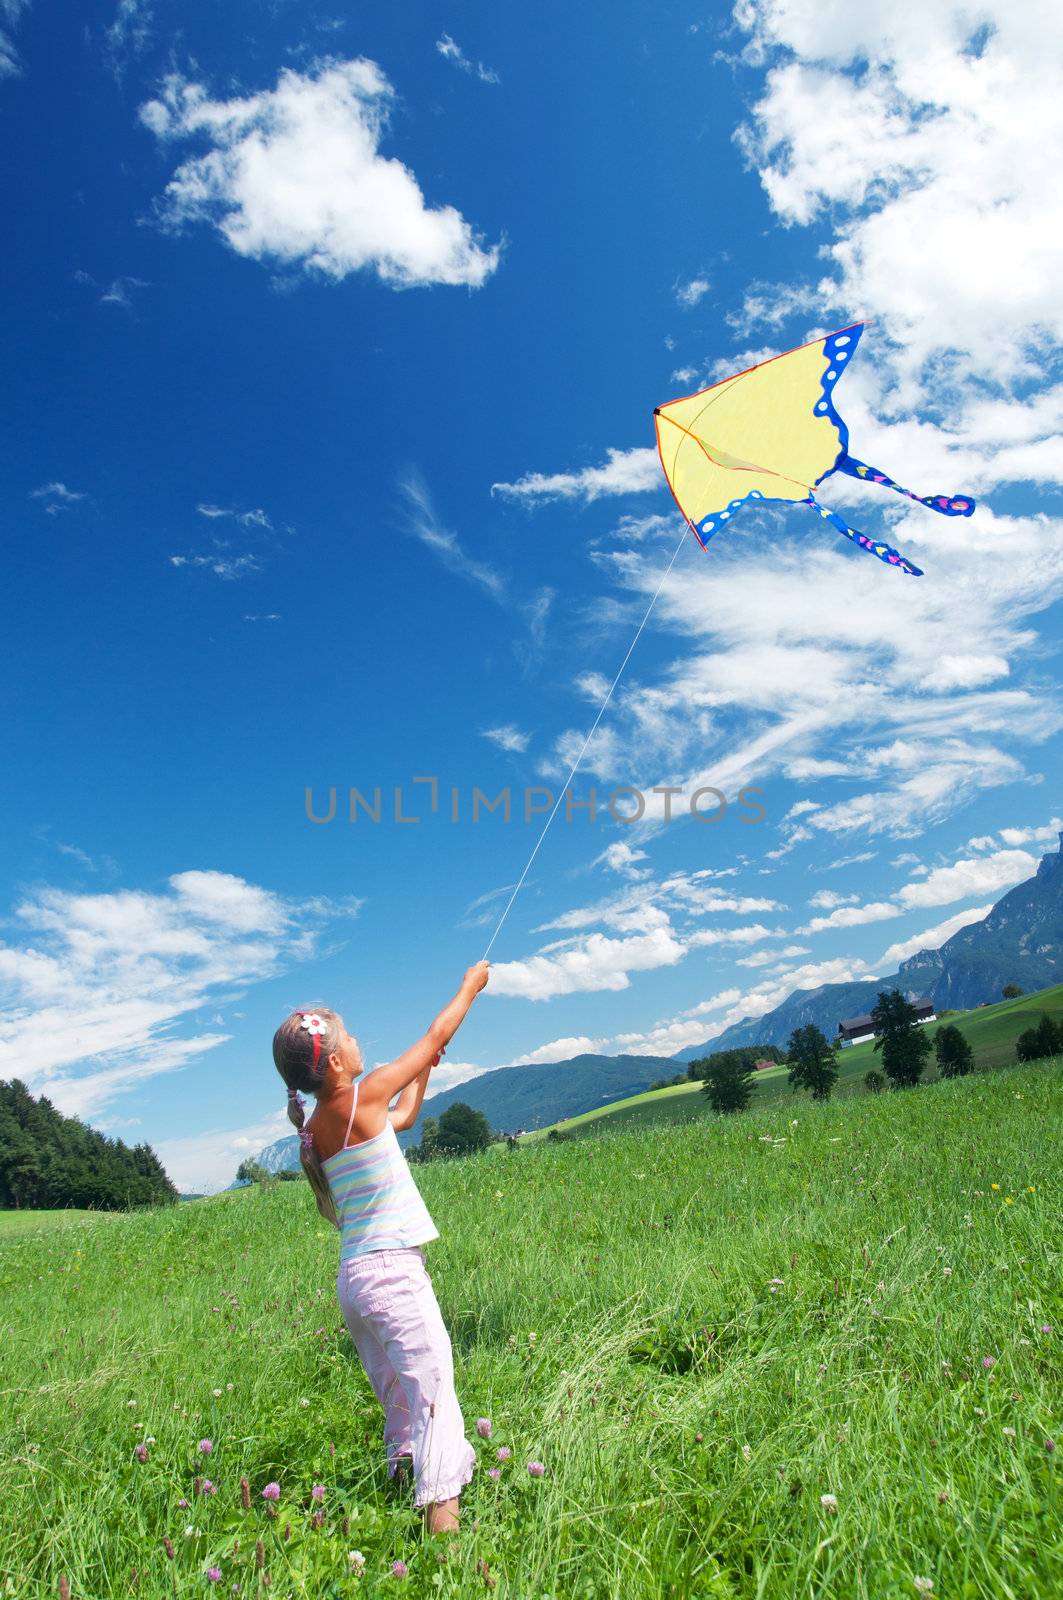 Cute child flying a kite in the bright blue sky. Vertical view